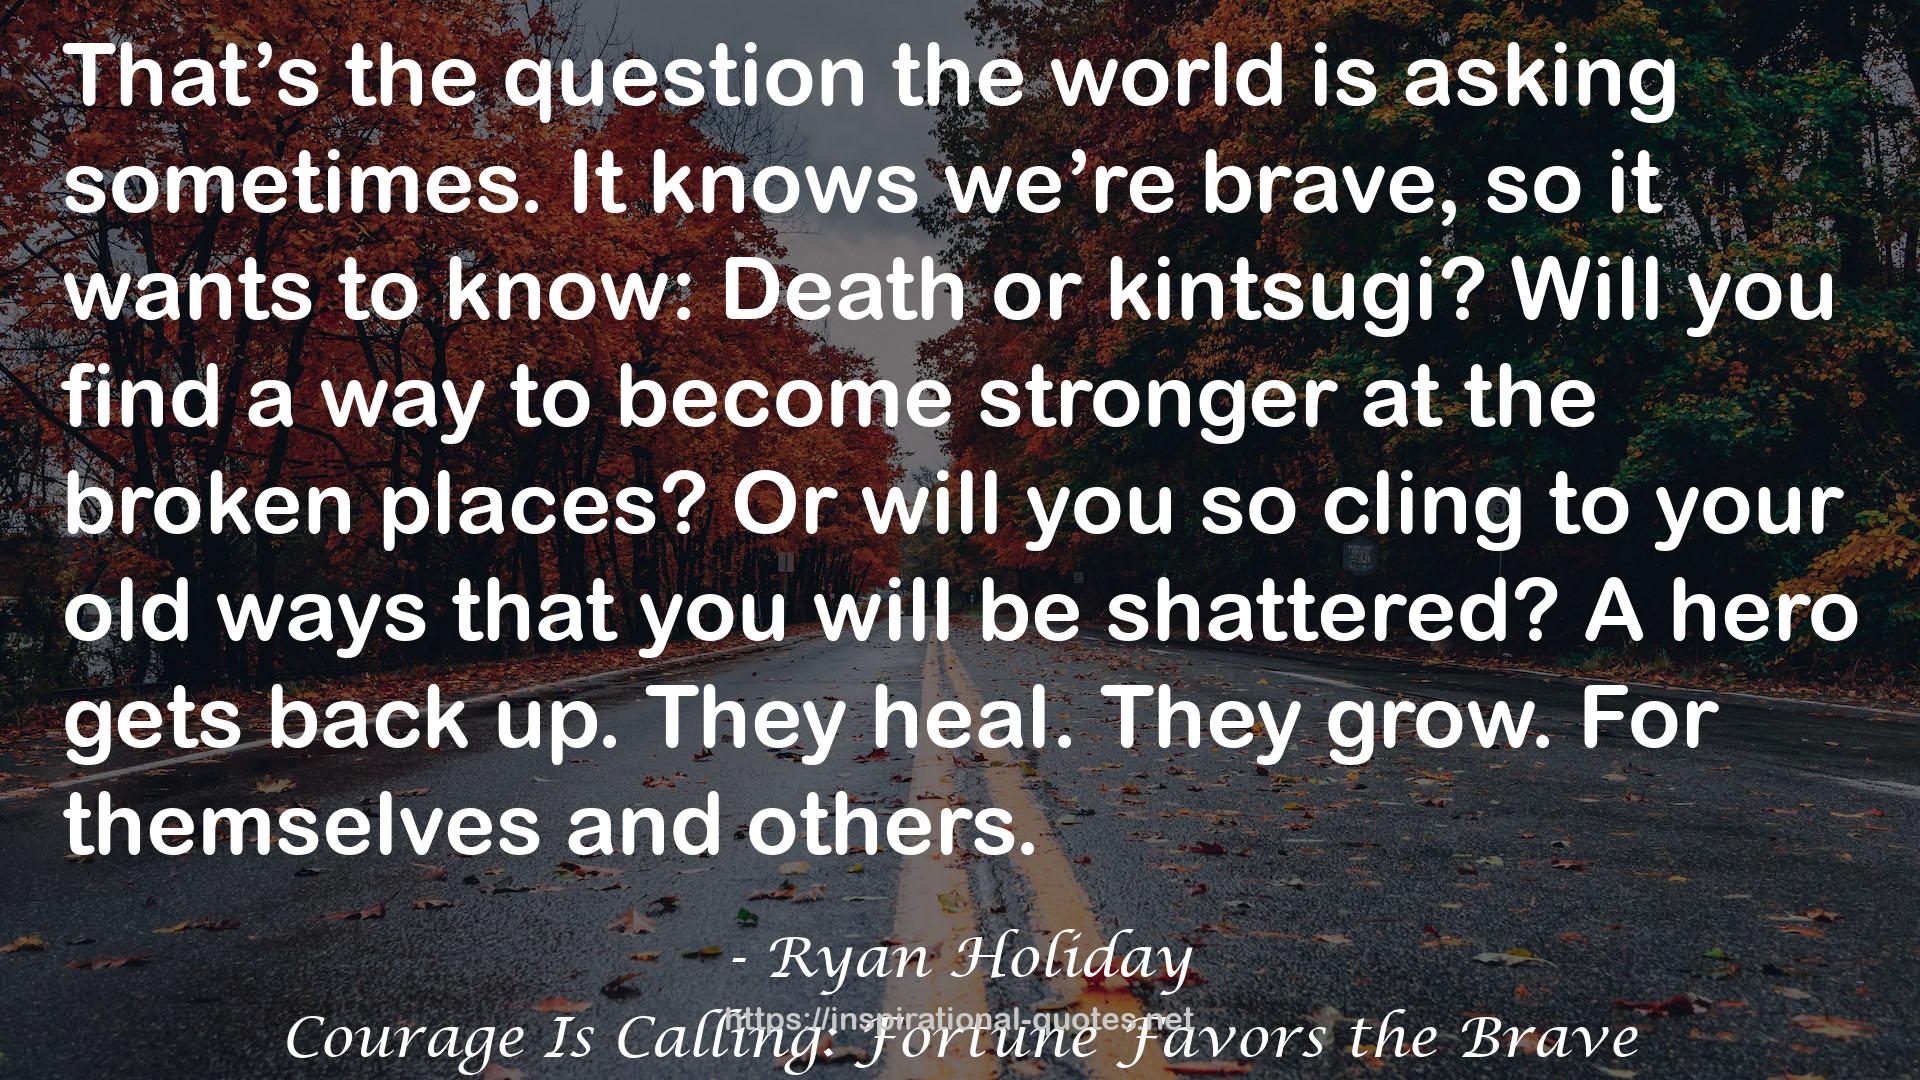 Courage Is Calling: Fortune Favors the Brave QUOTES